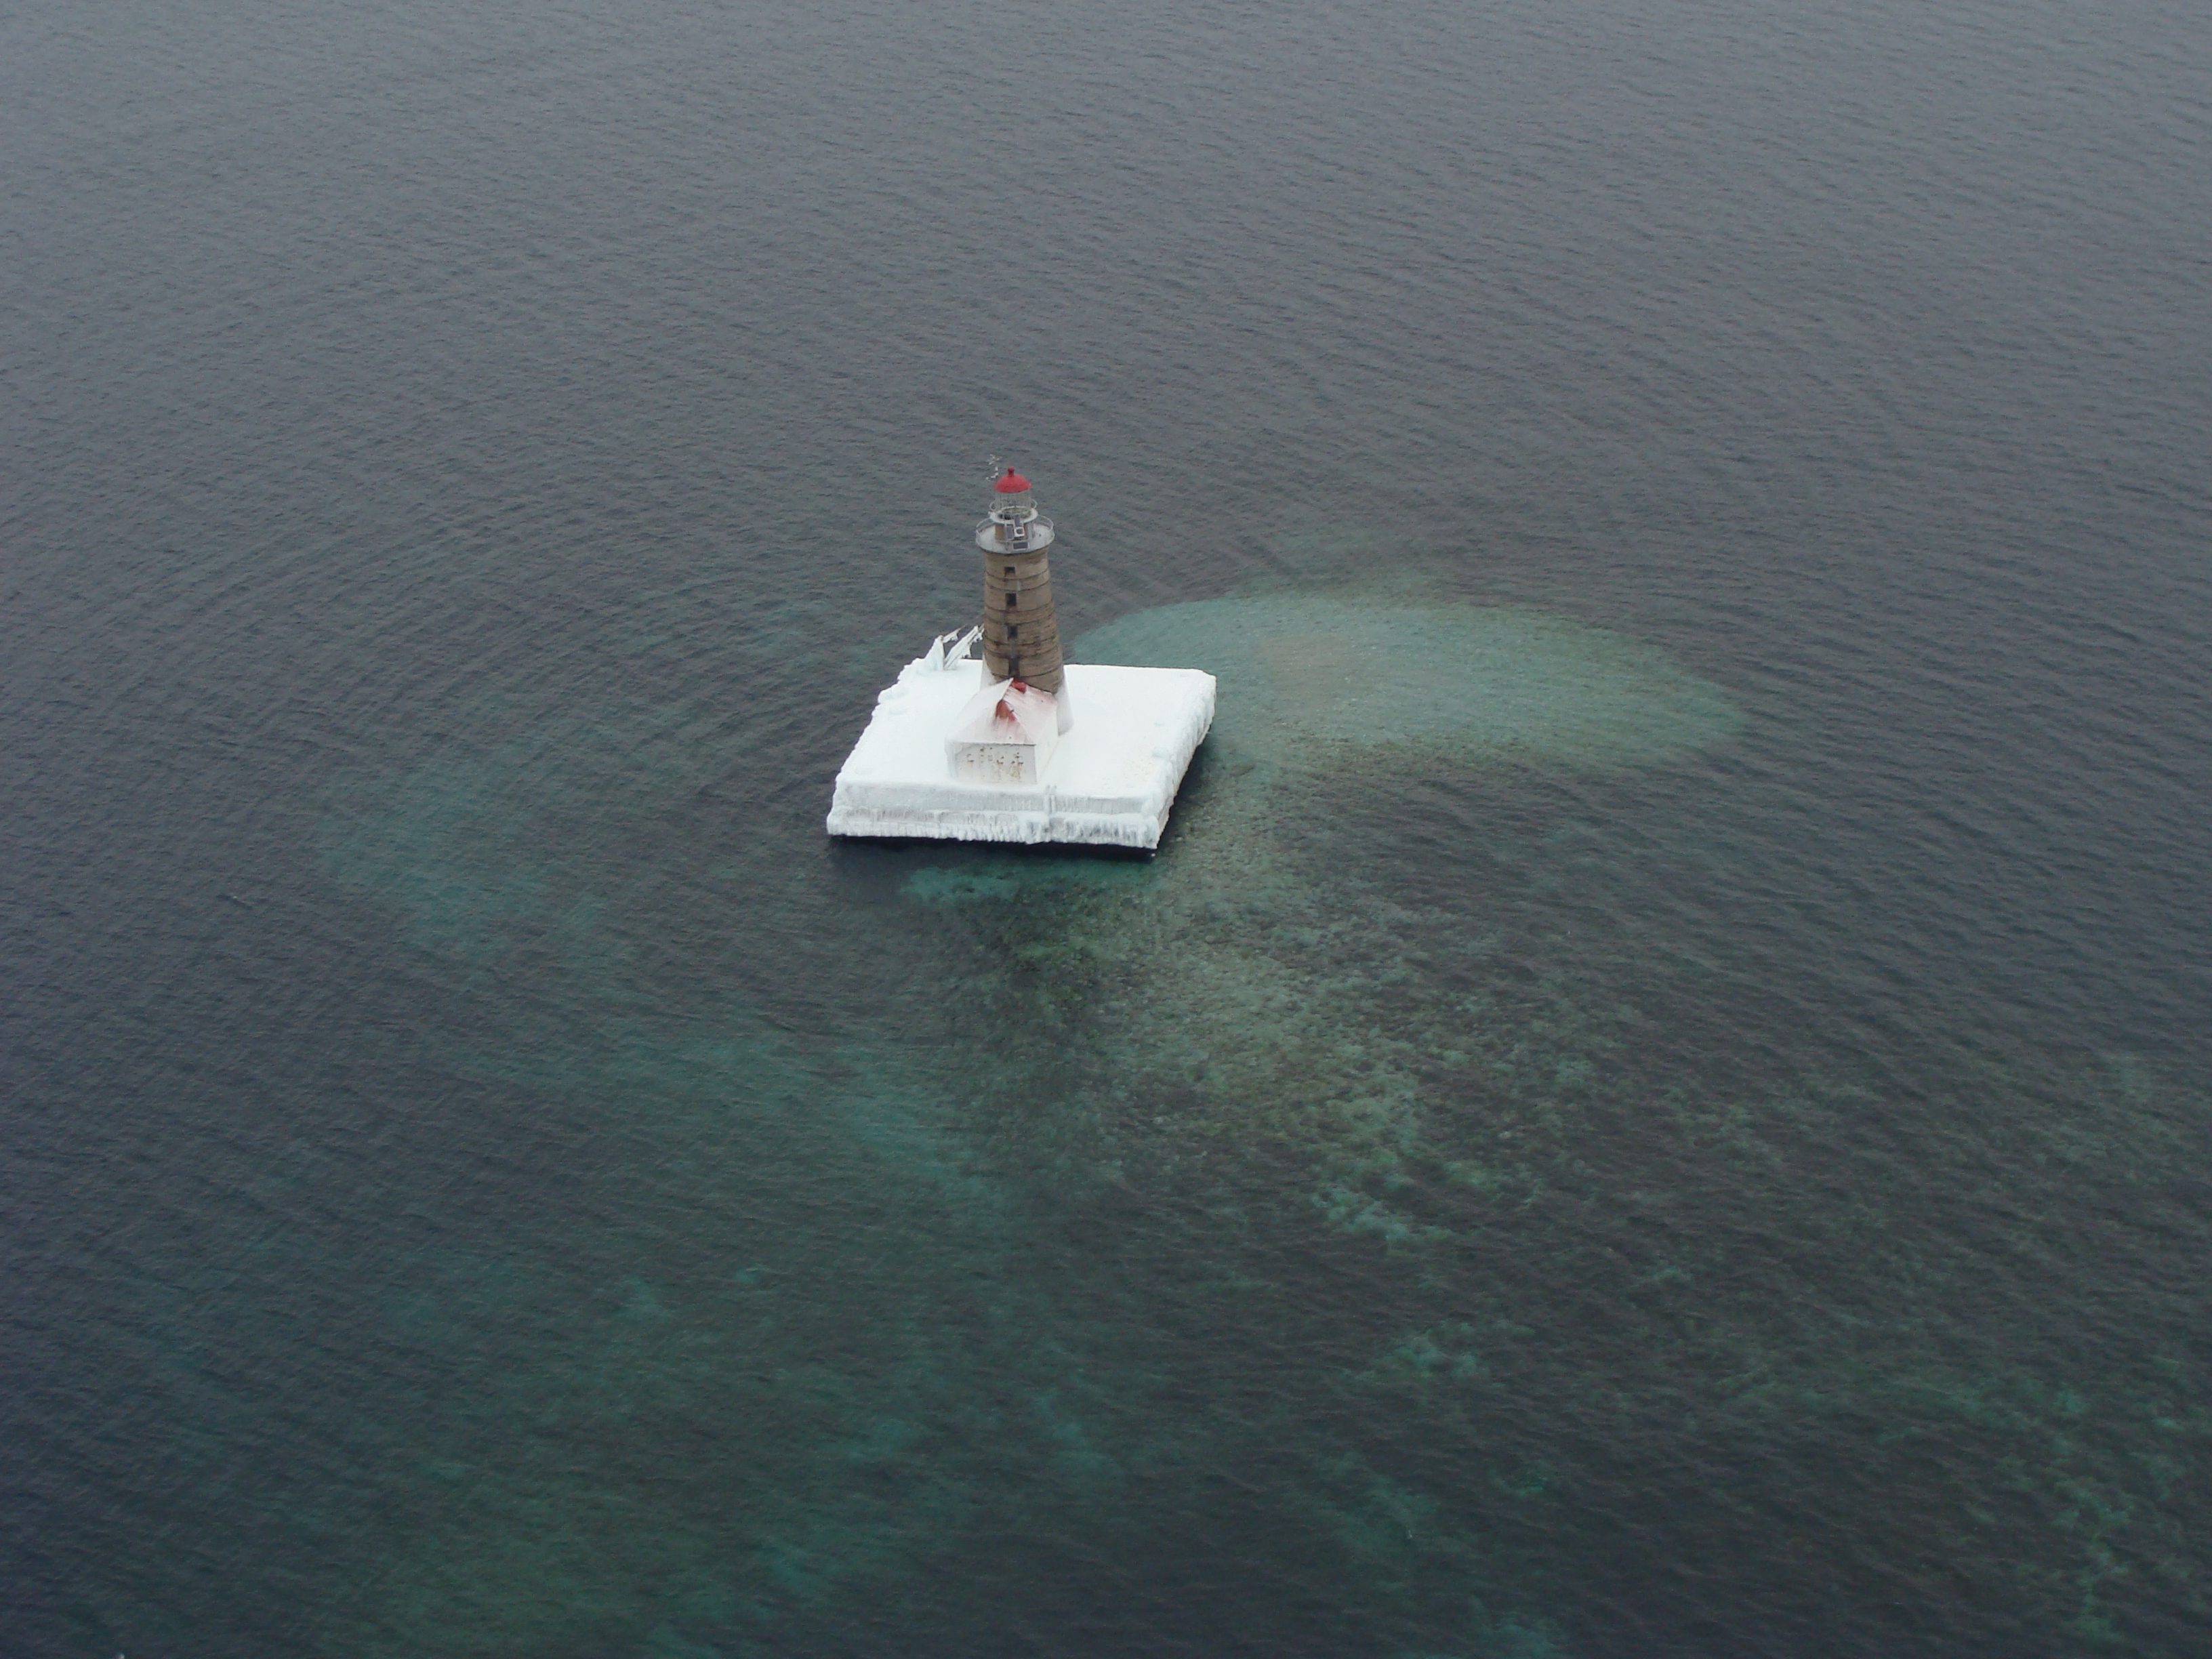 Spectacle Reef Lighthouse in northern Lake Huron surrounded by open water, January 2014. Credit: Dick Moehl.